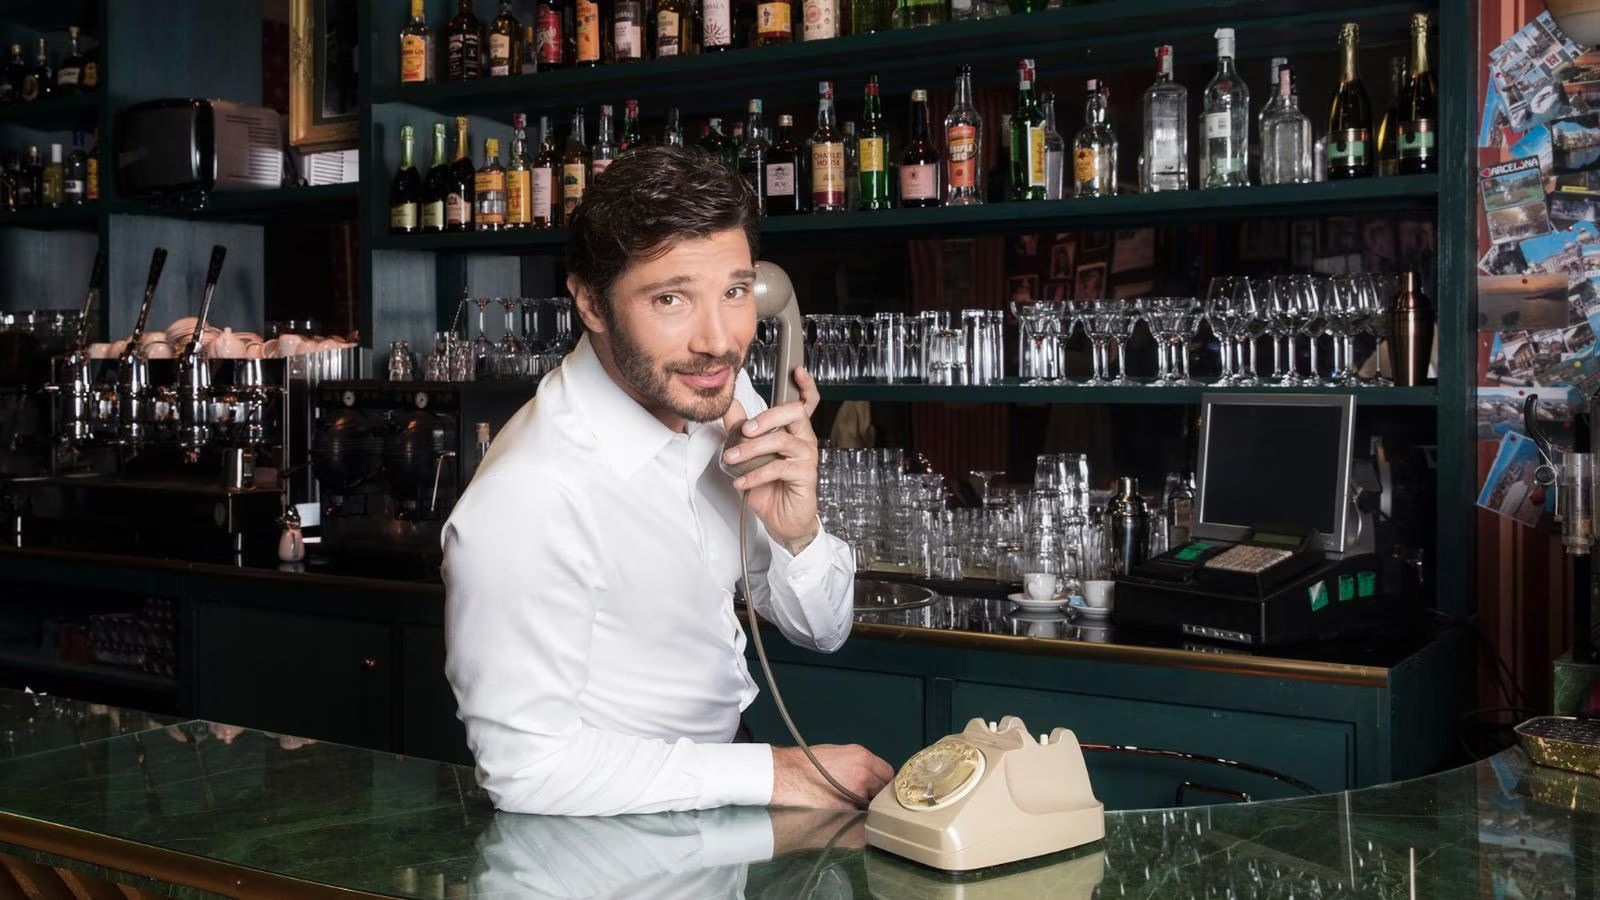 Bar Stella with Stefano De Martino, tonight on Rai 2 the first episode of the new season: previews